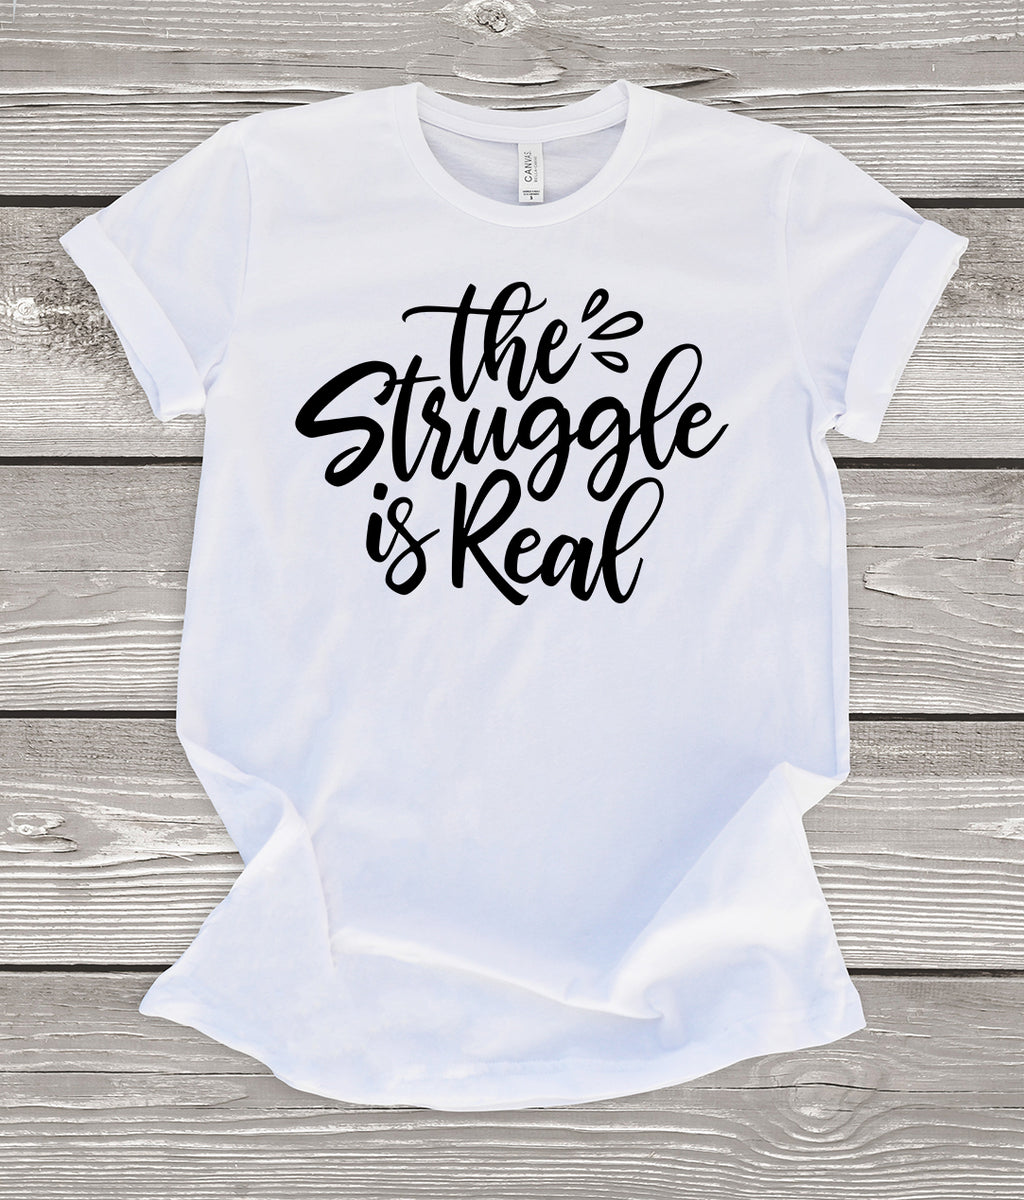 The Struggle is Real T-Shirt